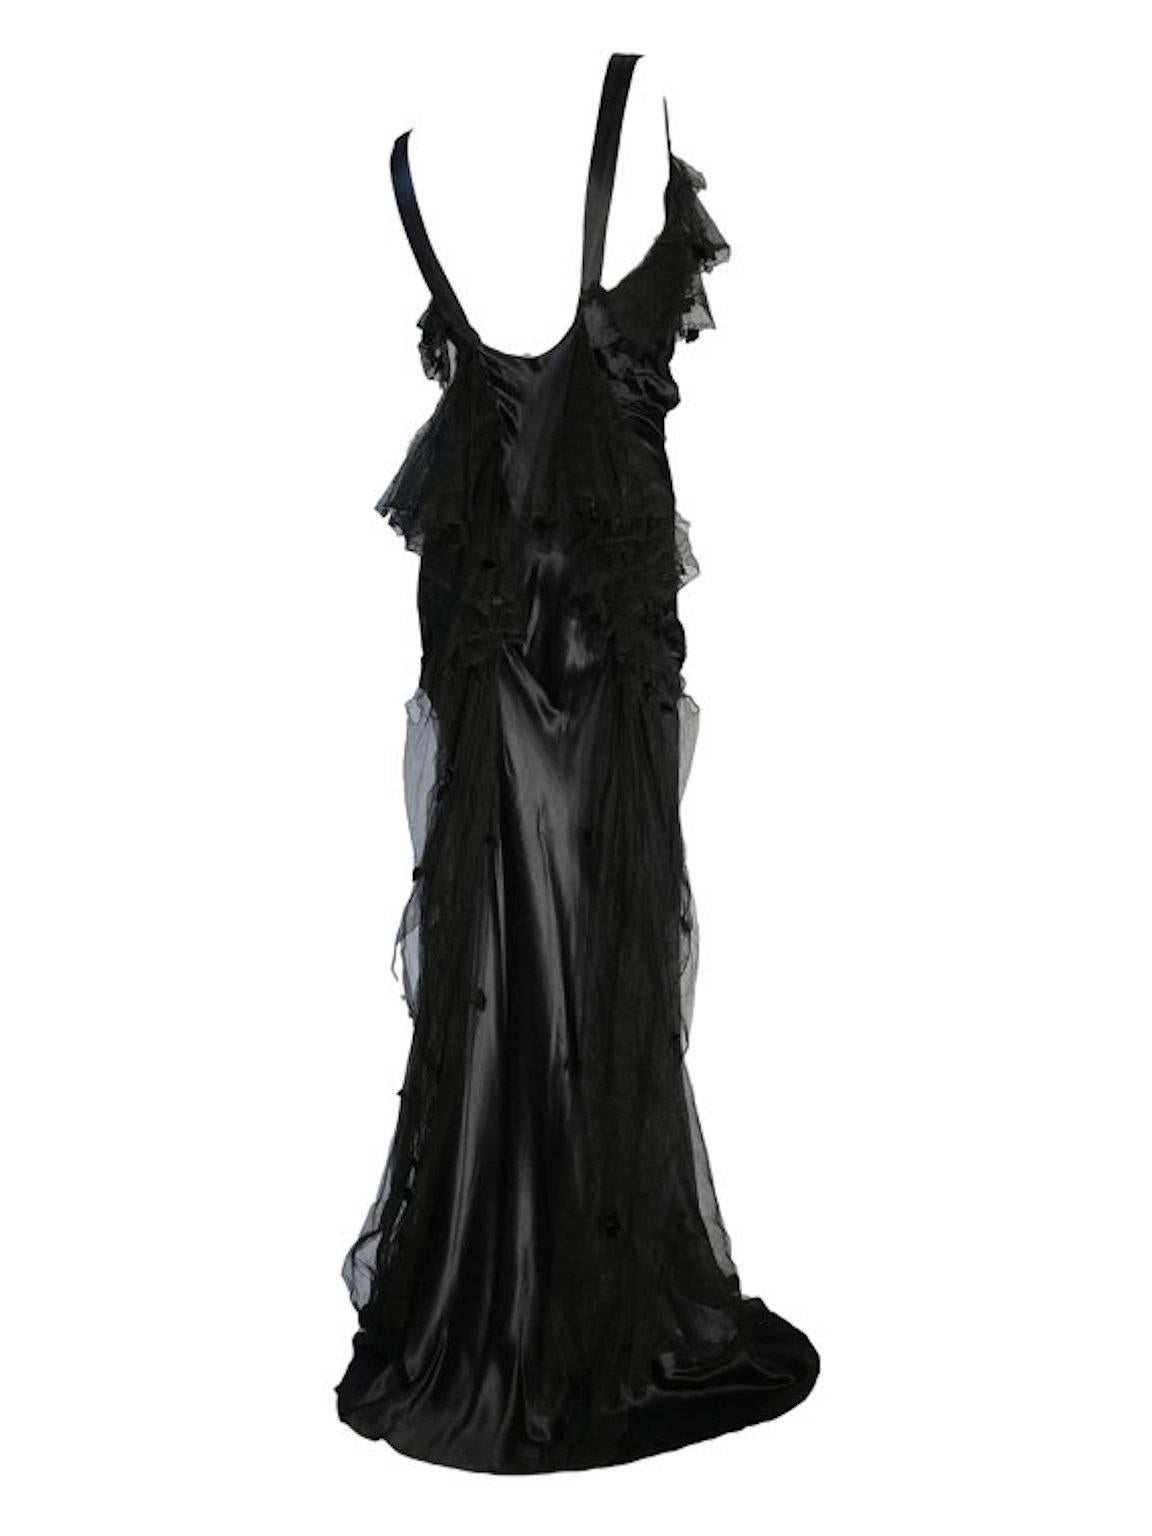 A rare piece of British couture. Victor Stiebel original Art Deco 1920's satin silk full length bias cut gown, with polka dot mesh trim, silk chiffon lining at top part of dress, and hook and eye fastening. 

Size UK 8/10 Measures: 17 inches